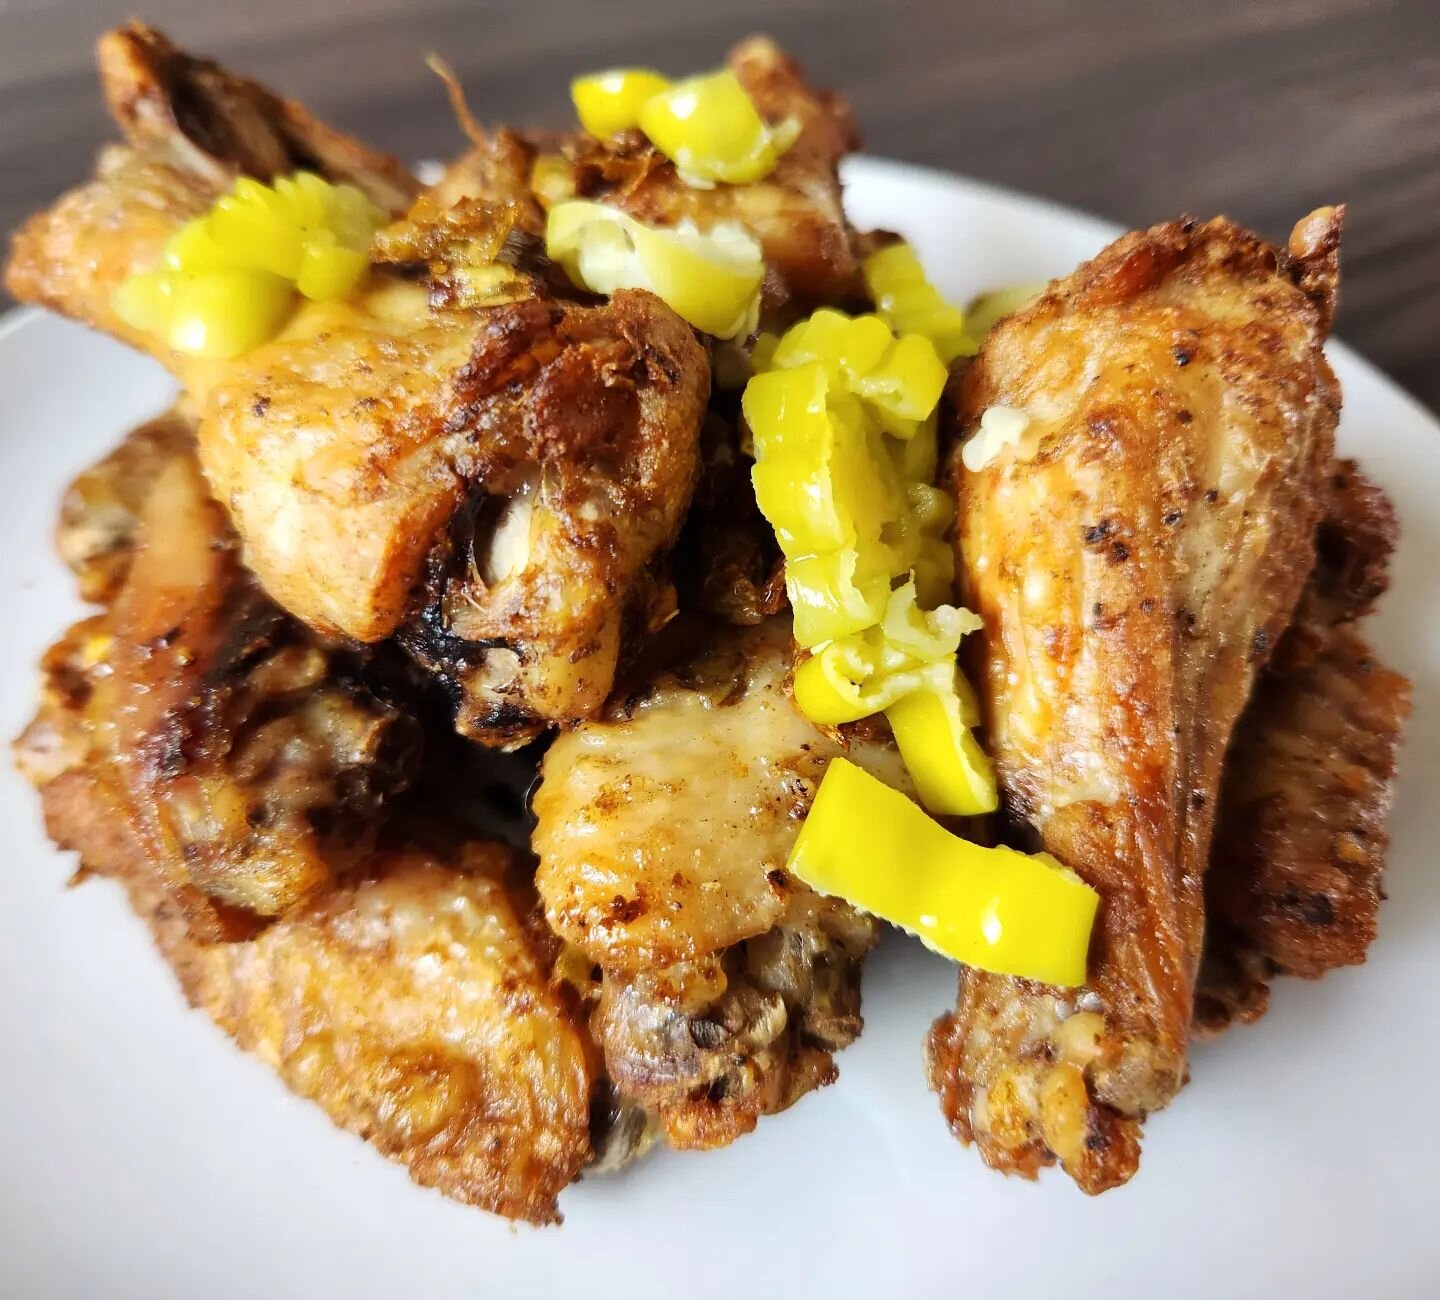 Being a fan of all things pickled and lovin&rsquo; great wings, why not combine the two?!

These peperoncini chicken wings are easy to make and a fun change from some of the more traditional flavours. Not to mention, this recipe is a great way to use